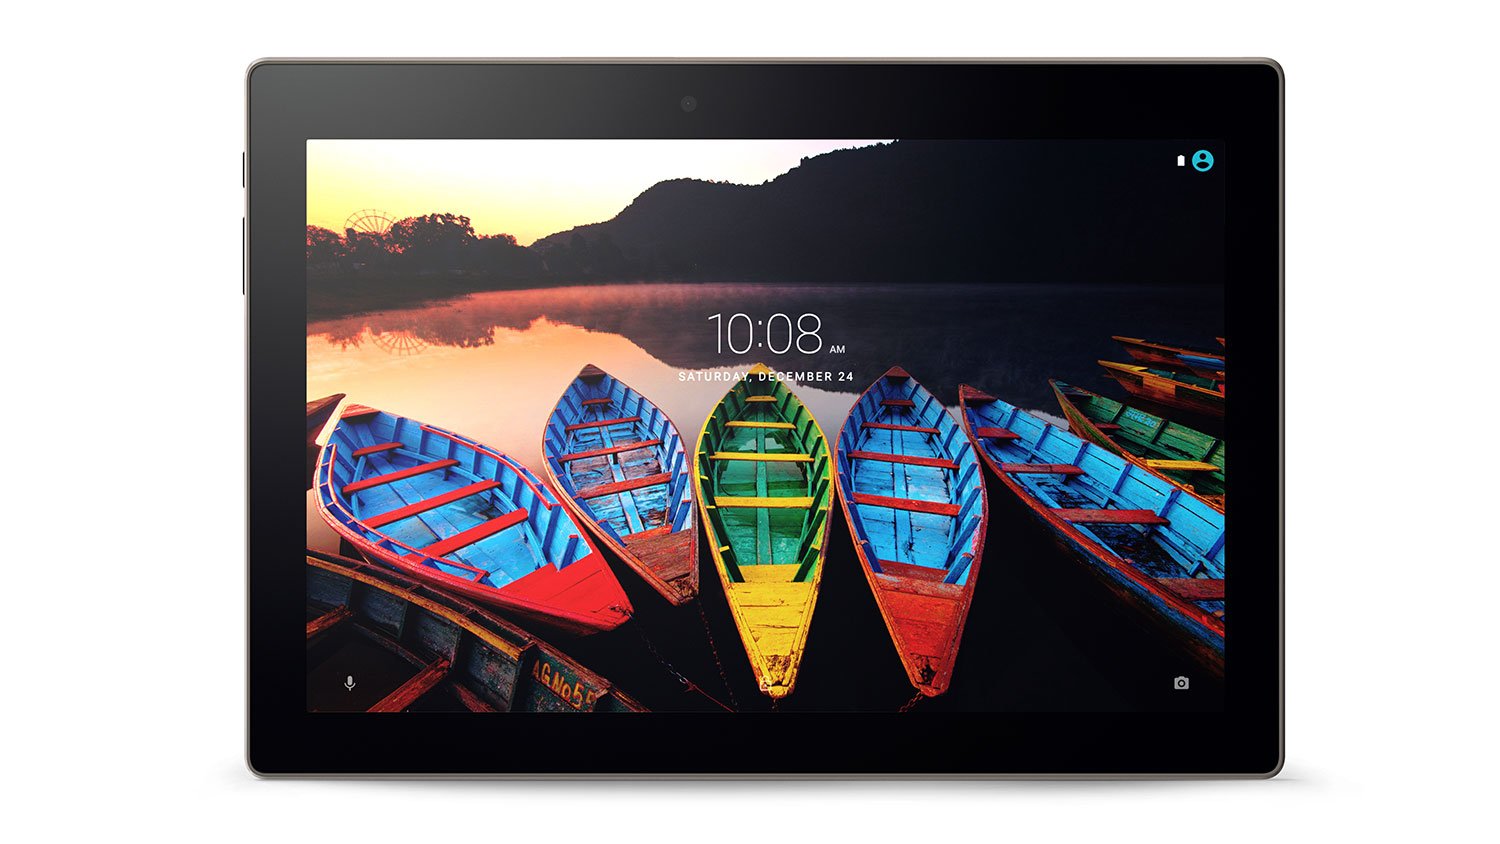 lenovo tab 3 android tablets mwc 2016 tab3 10 business 0003